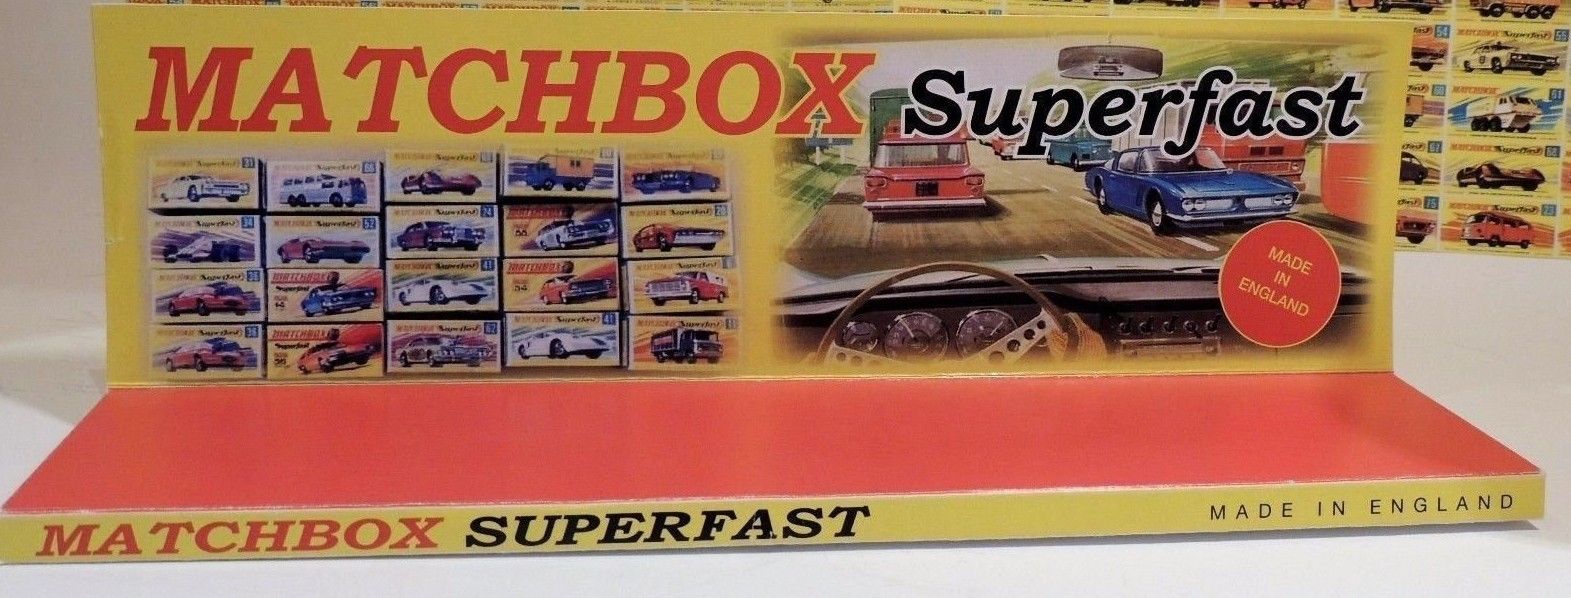 Matchbox Superfast / Display SPECIAL EDITION 13 in X 4 in